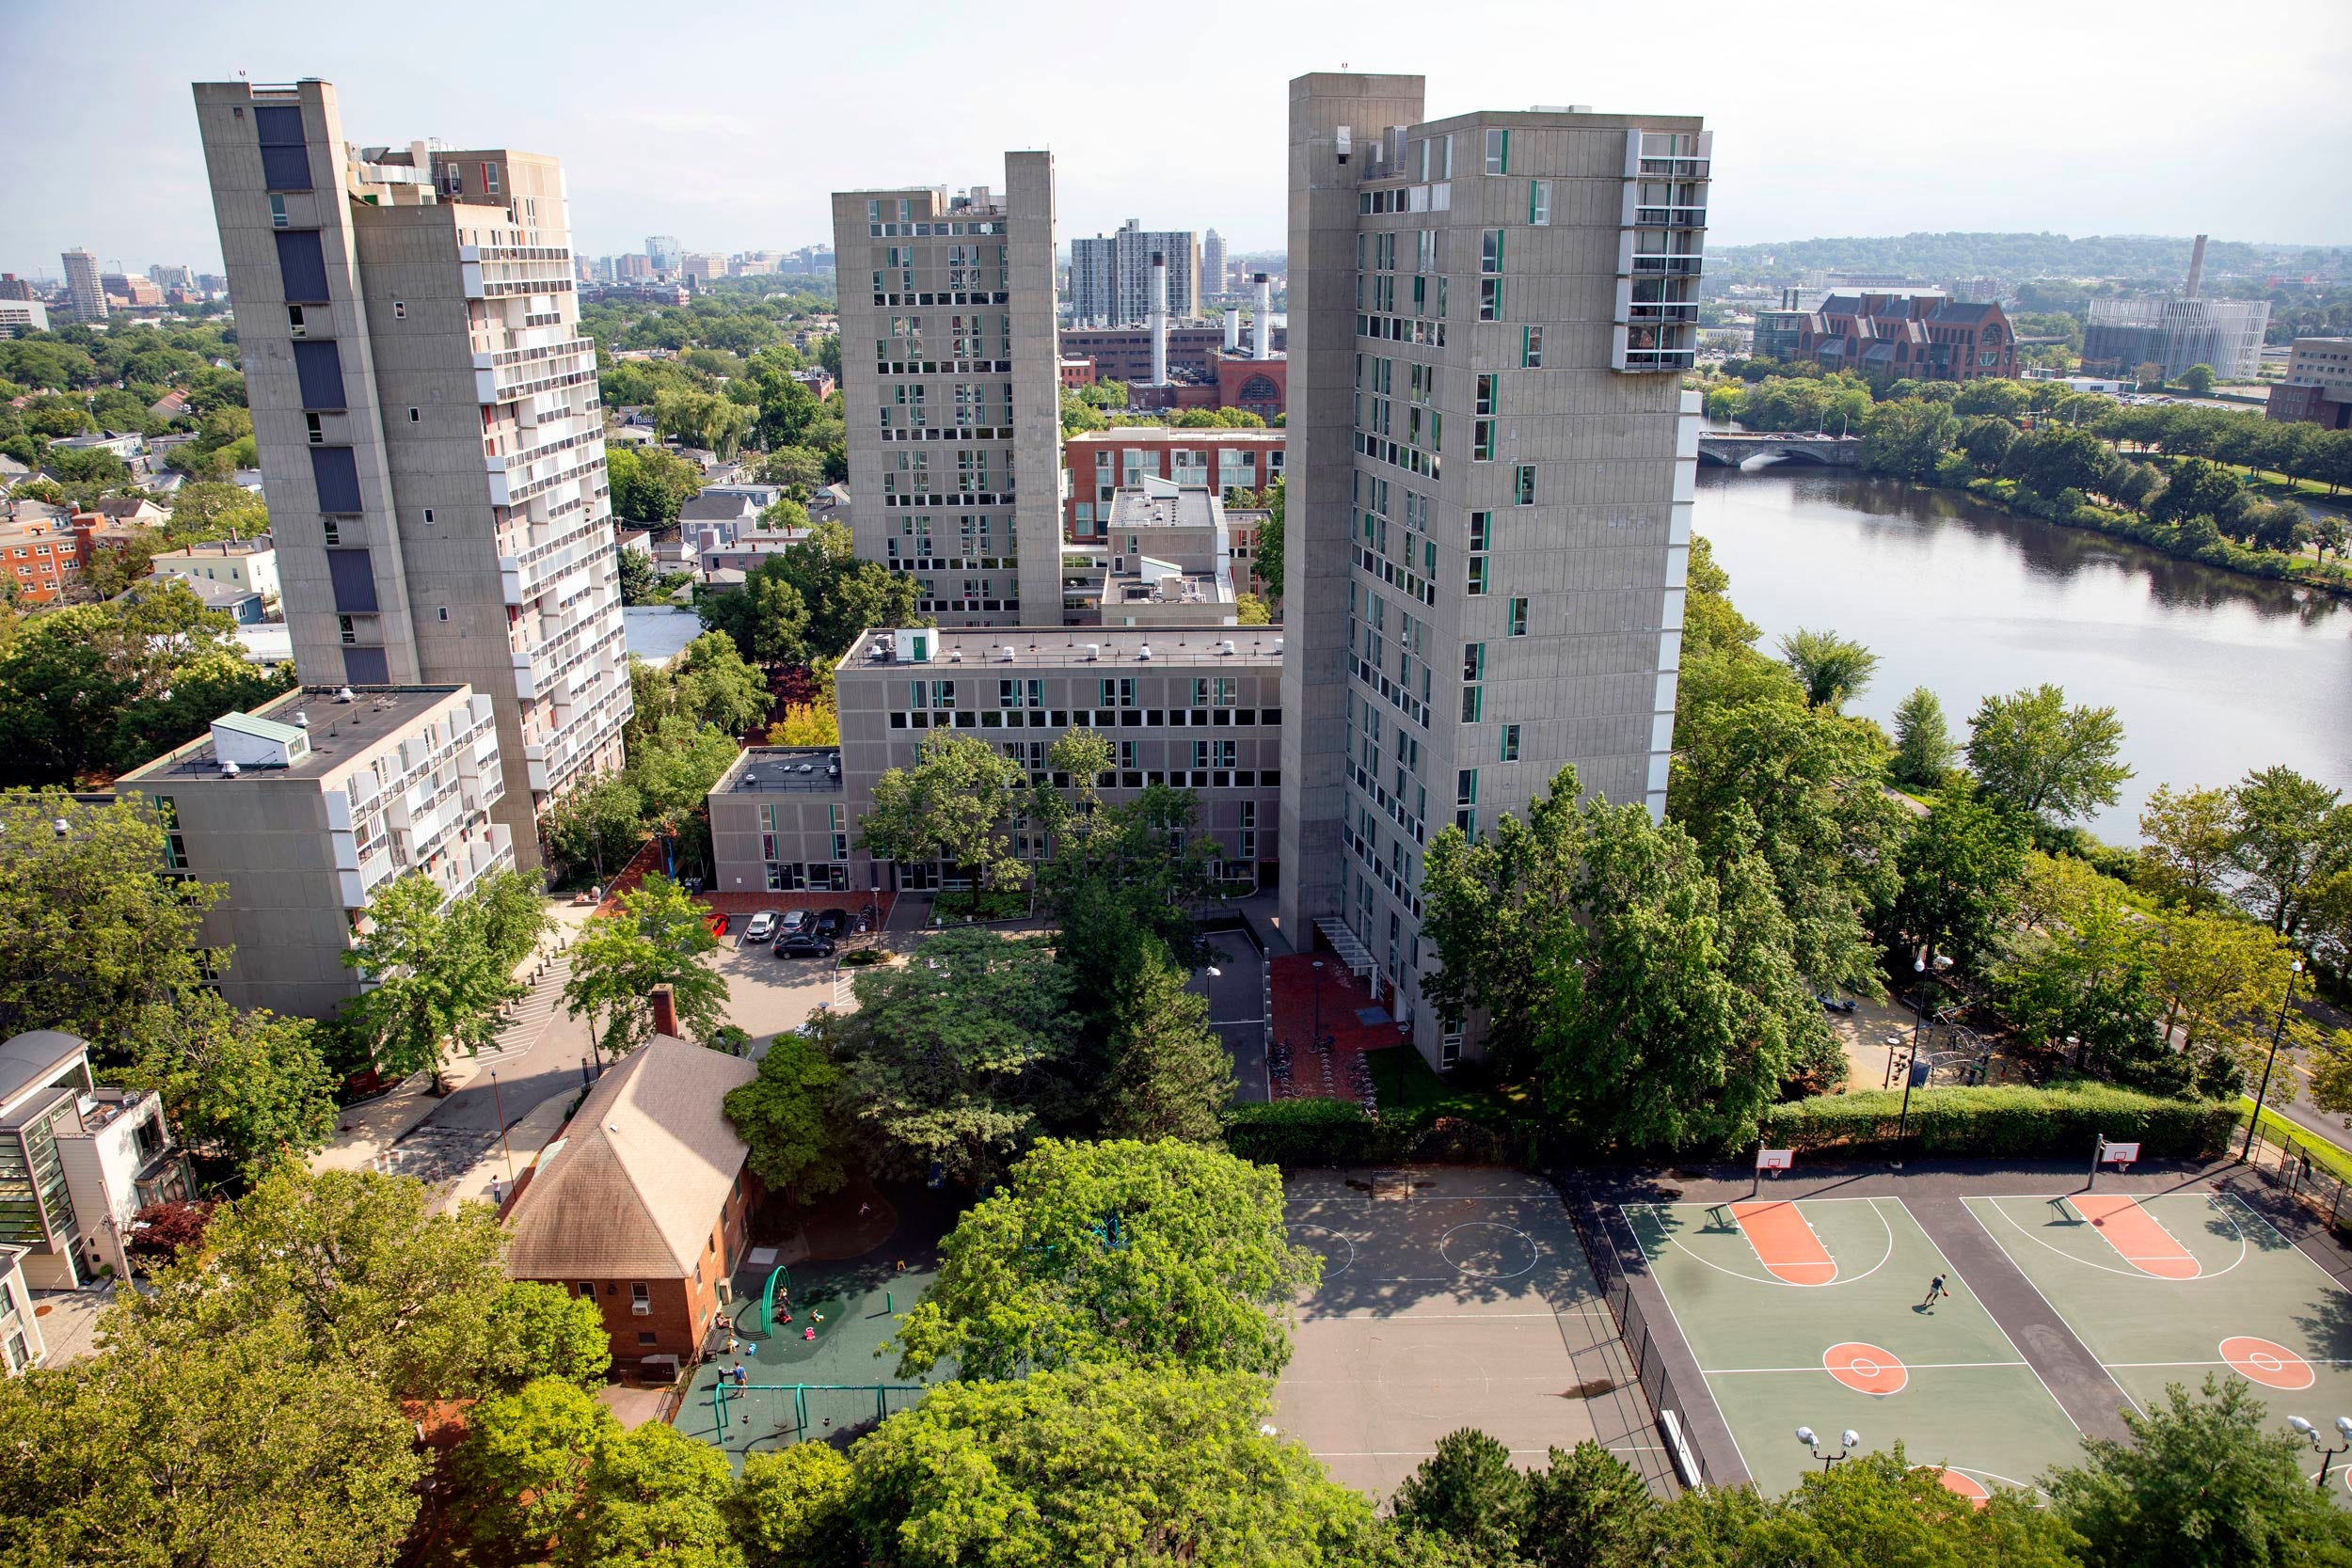 An overview of Peabody Terrace and the Charles River.